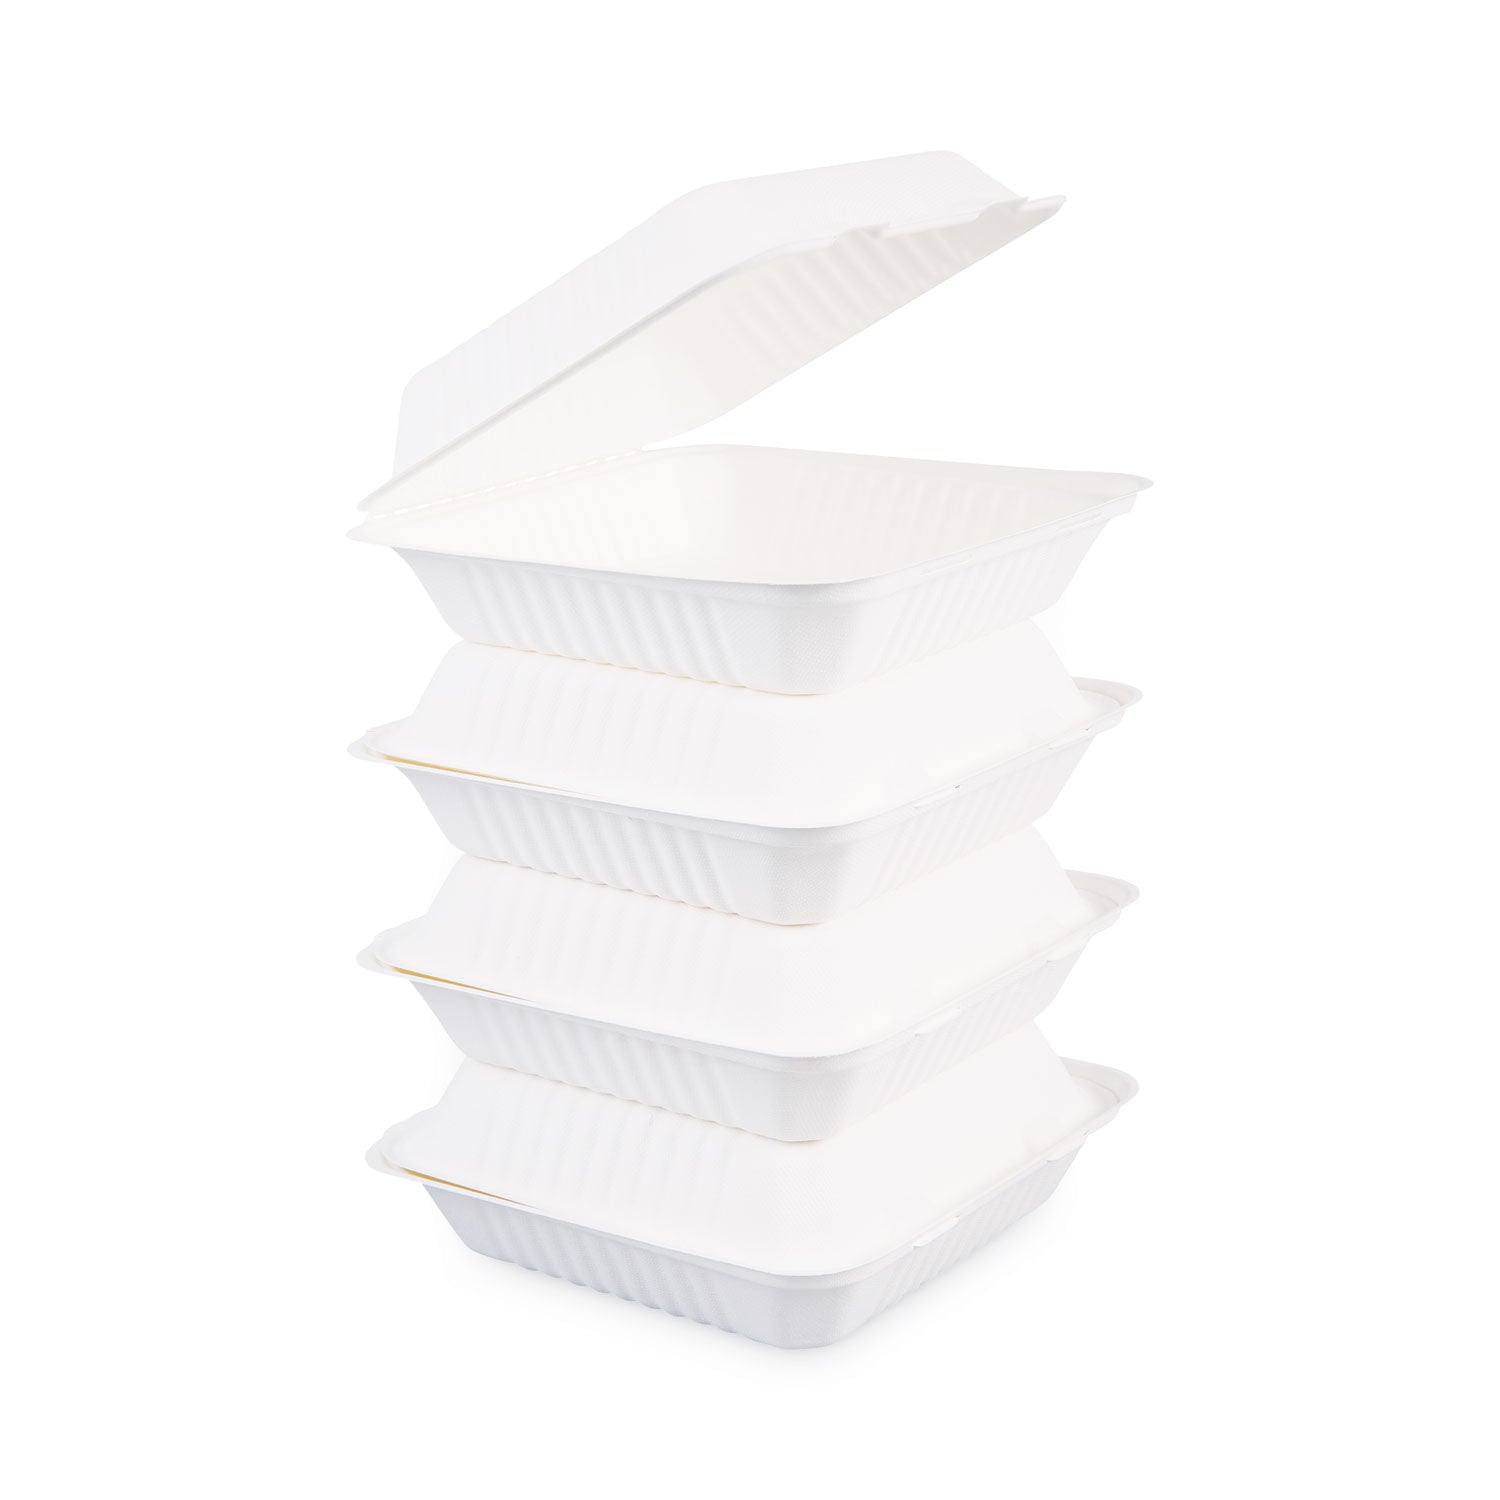 bagasse-food-containers-hinged-lid-1-compartment-9-x-9-x-319-white-sugarcane-100-sleeve-2-sleeves-carton_bwkhingewf1cm9 - 6